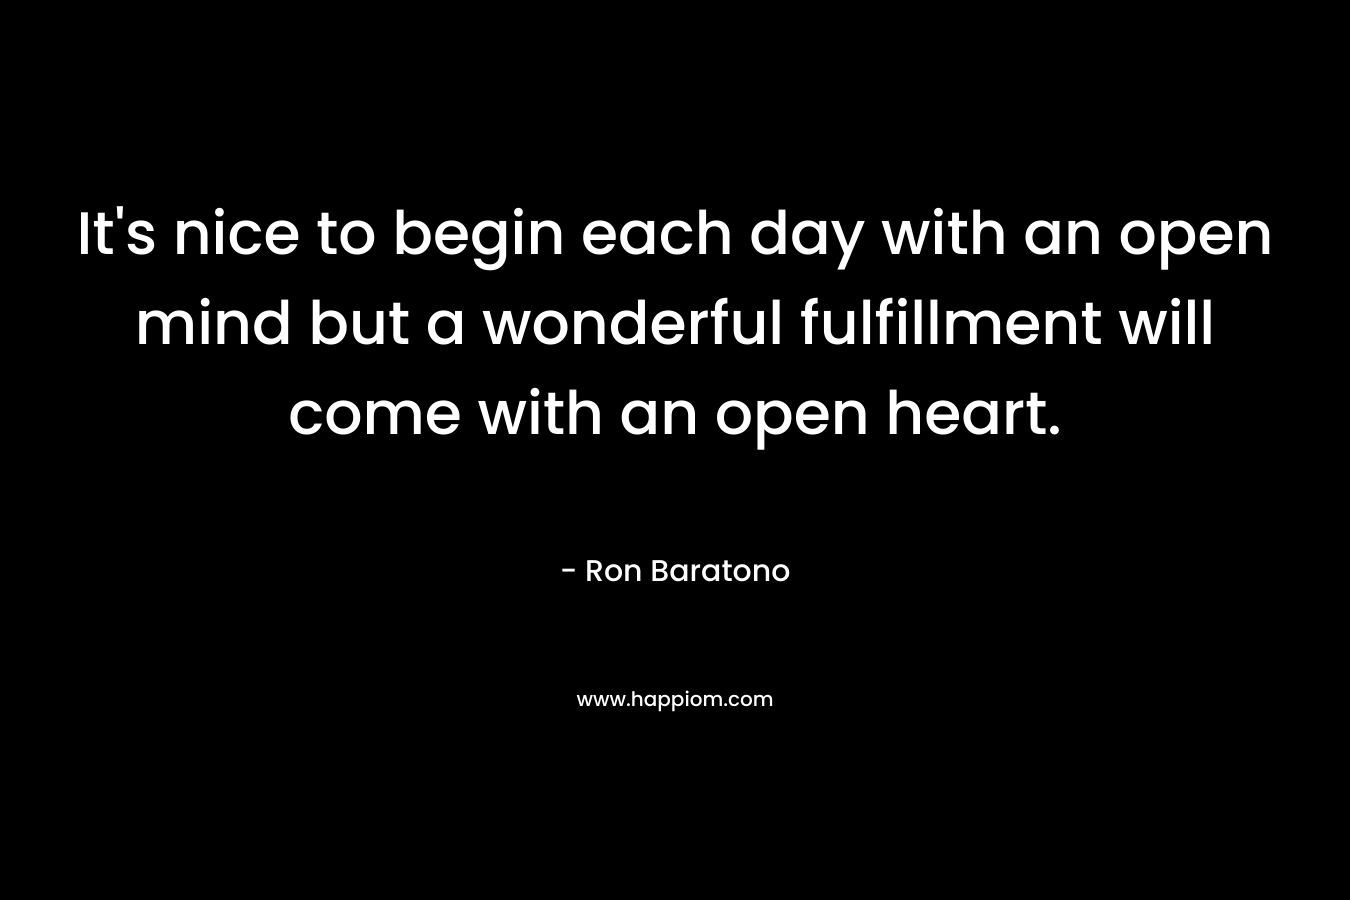 It's nice to begin each day with an open mind but a wonderful fulfillment will come with an open heart.